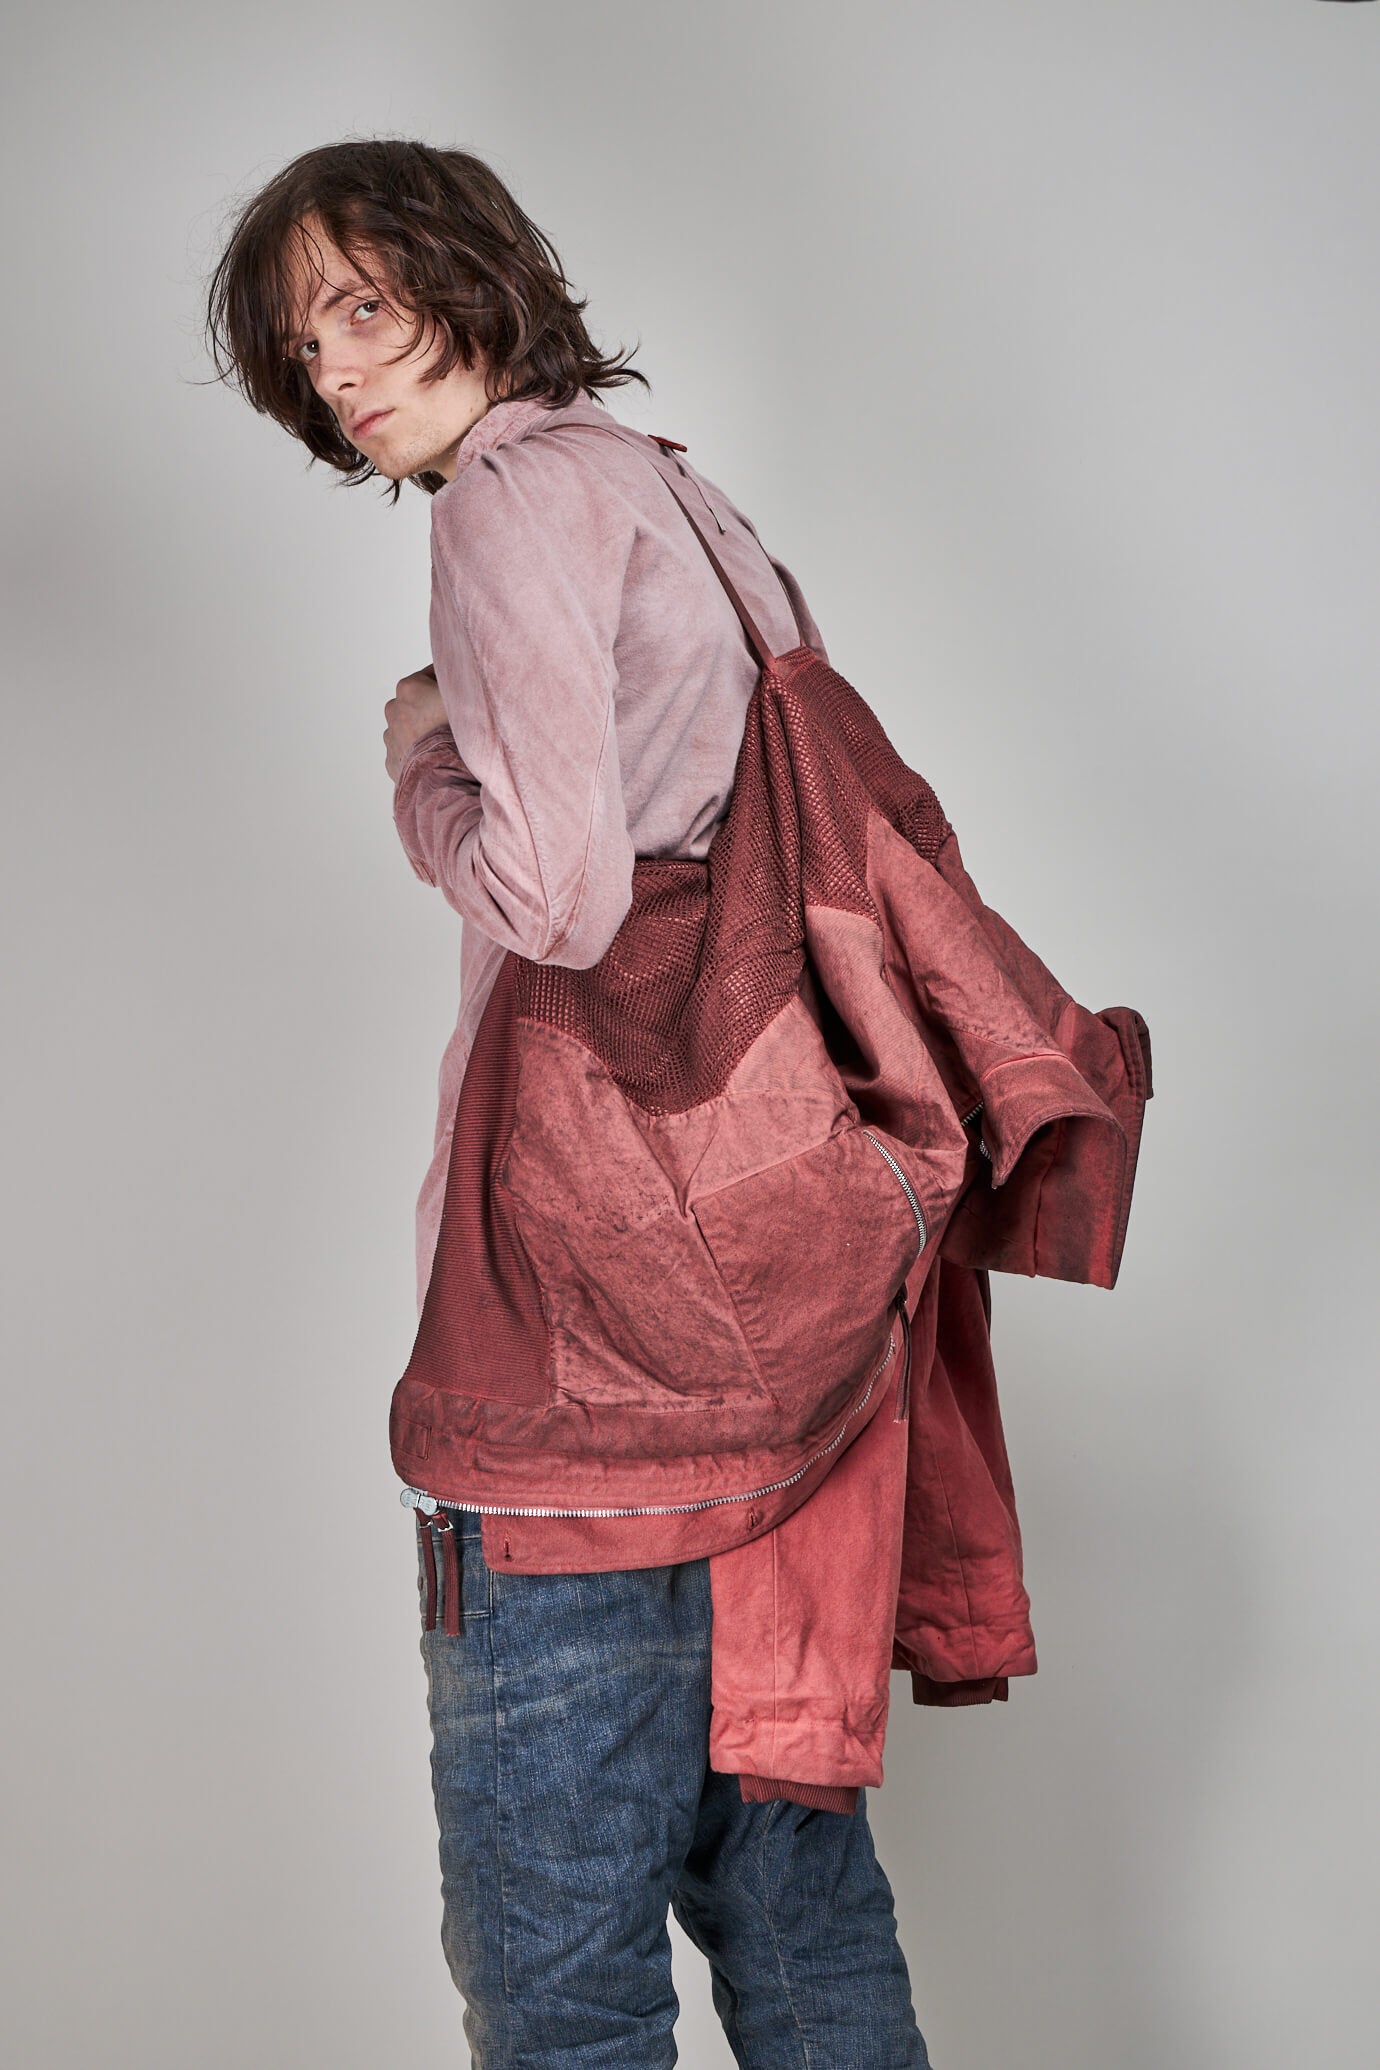 Parka Jacket 1.2, faded dirty rose – LABELS